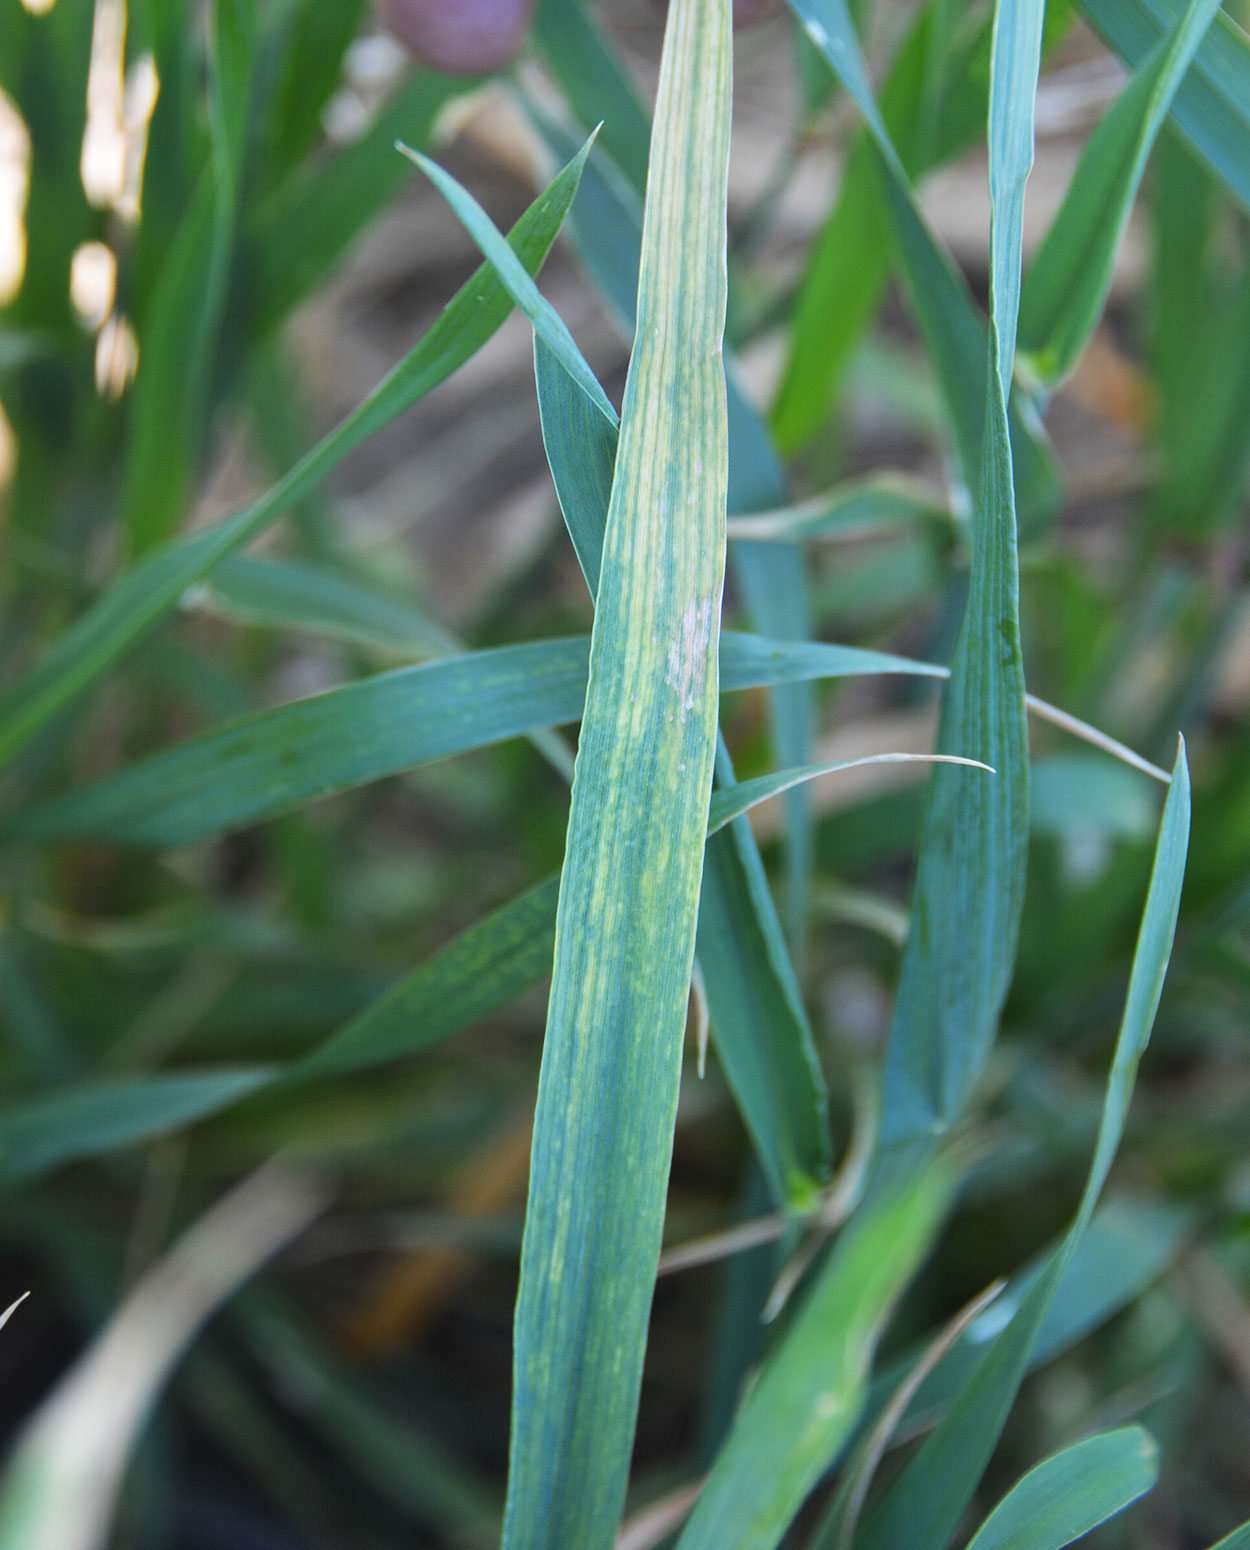 Wheat leaf showing the green and yellow mosaic streaking associated with WSMV.